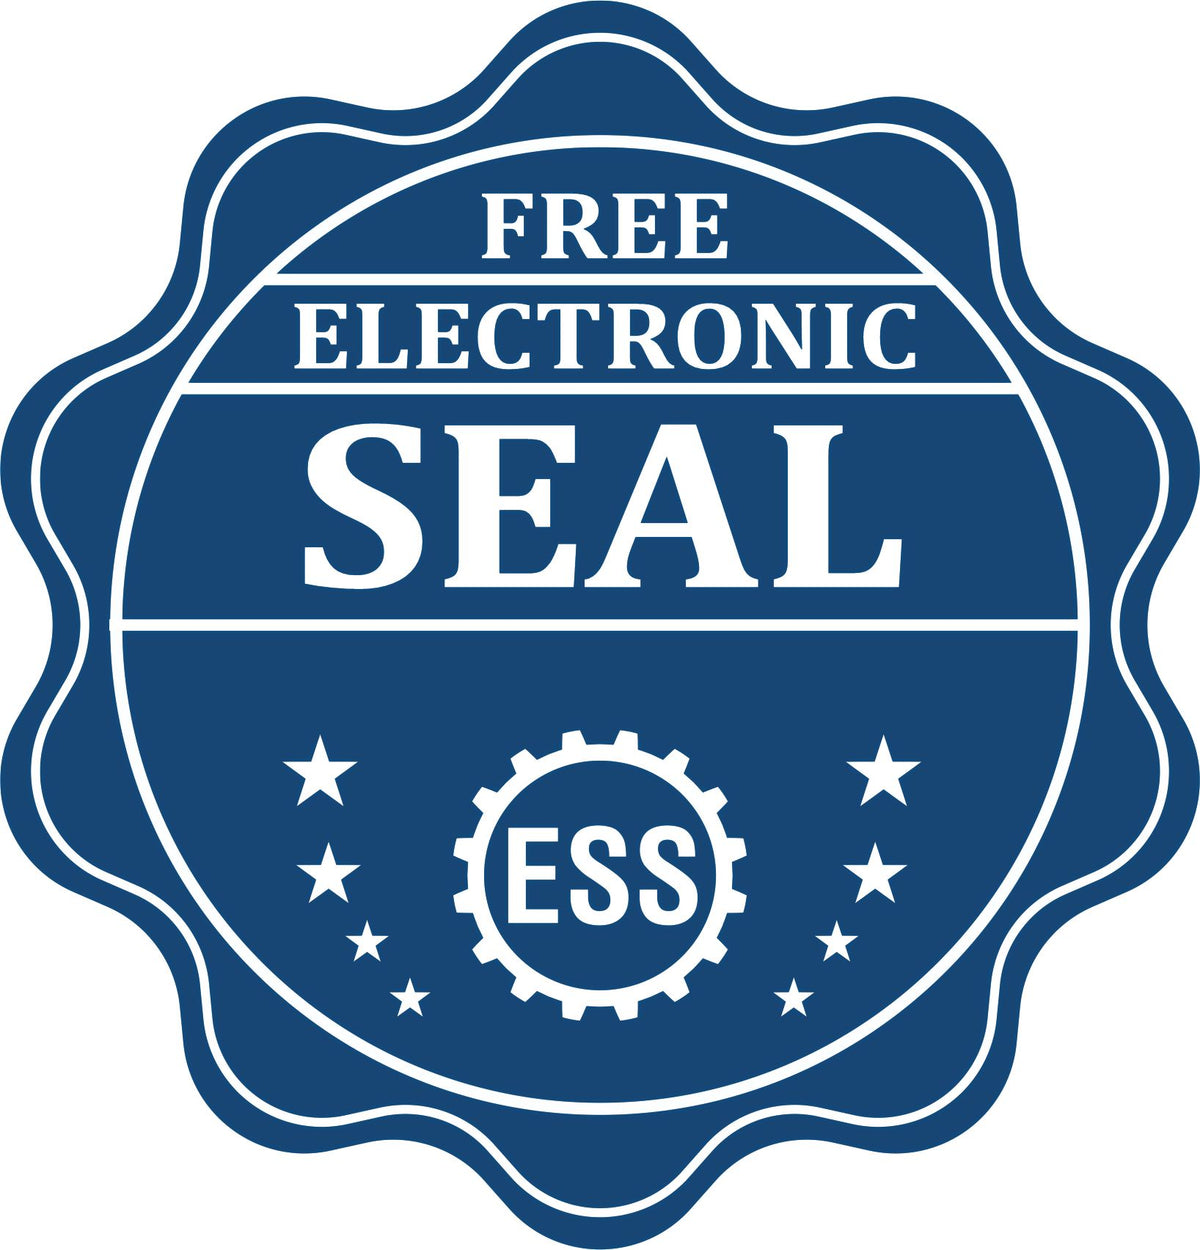 A badge showing a free electronic seal for the Slim Pre-Inked Delaware Professional Geologist Seal Stamp with stars and the ESS gear on the emblem.